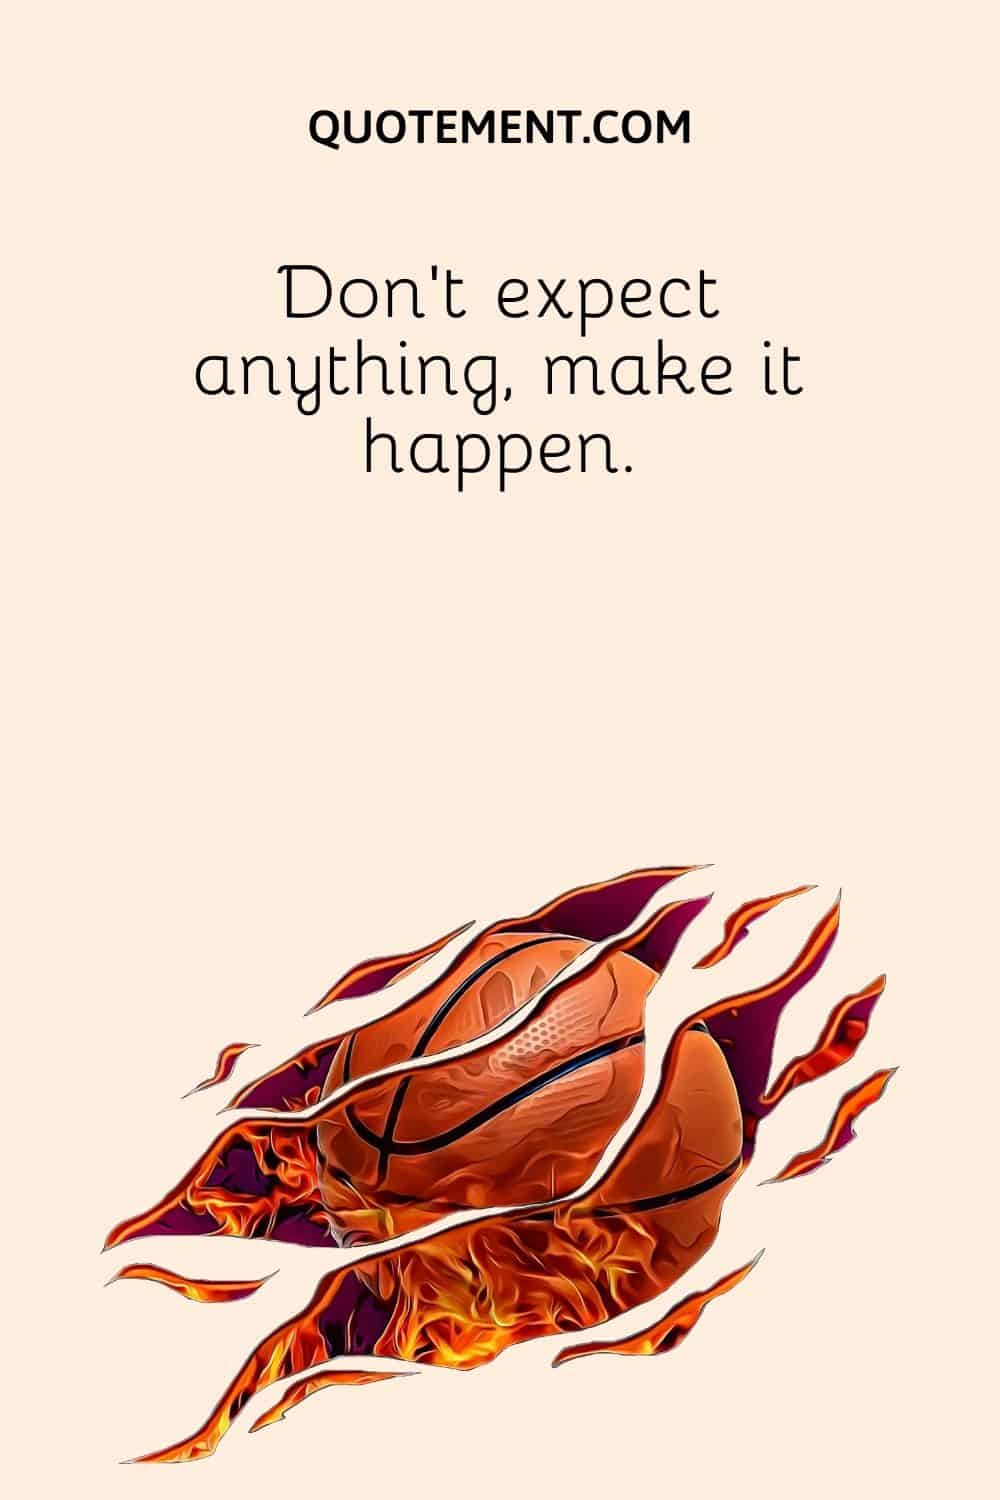 Don’t expect anything, make it happen